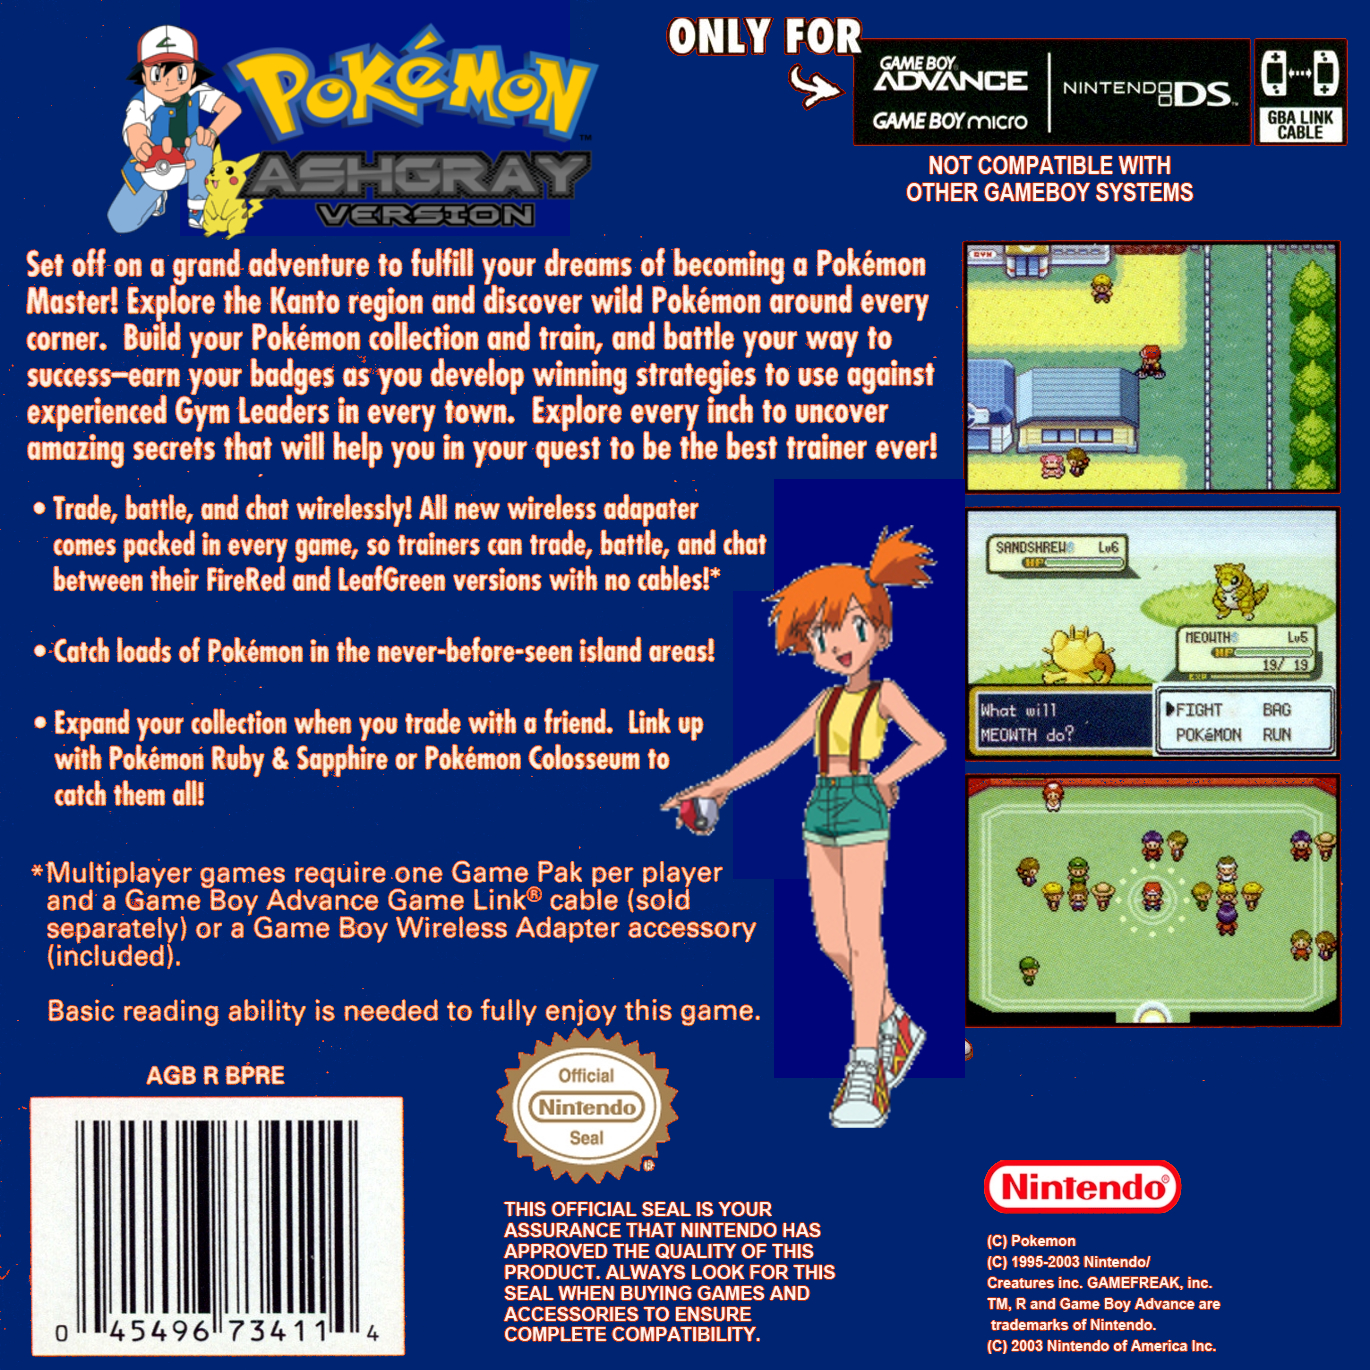 Pokemon Ash Gray 4.2 Rom For Android